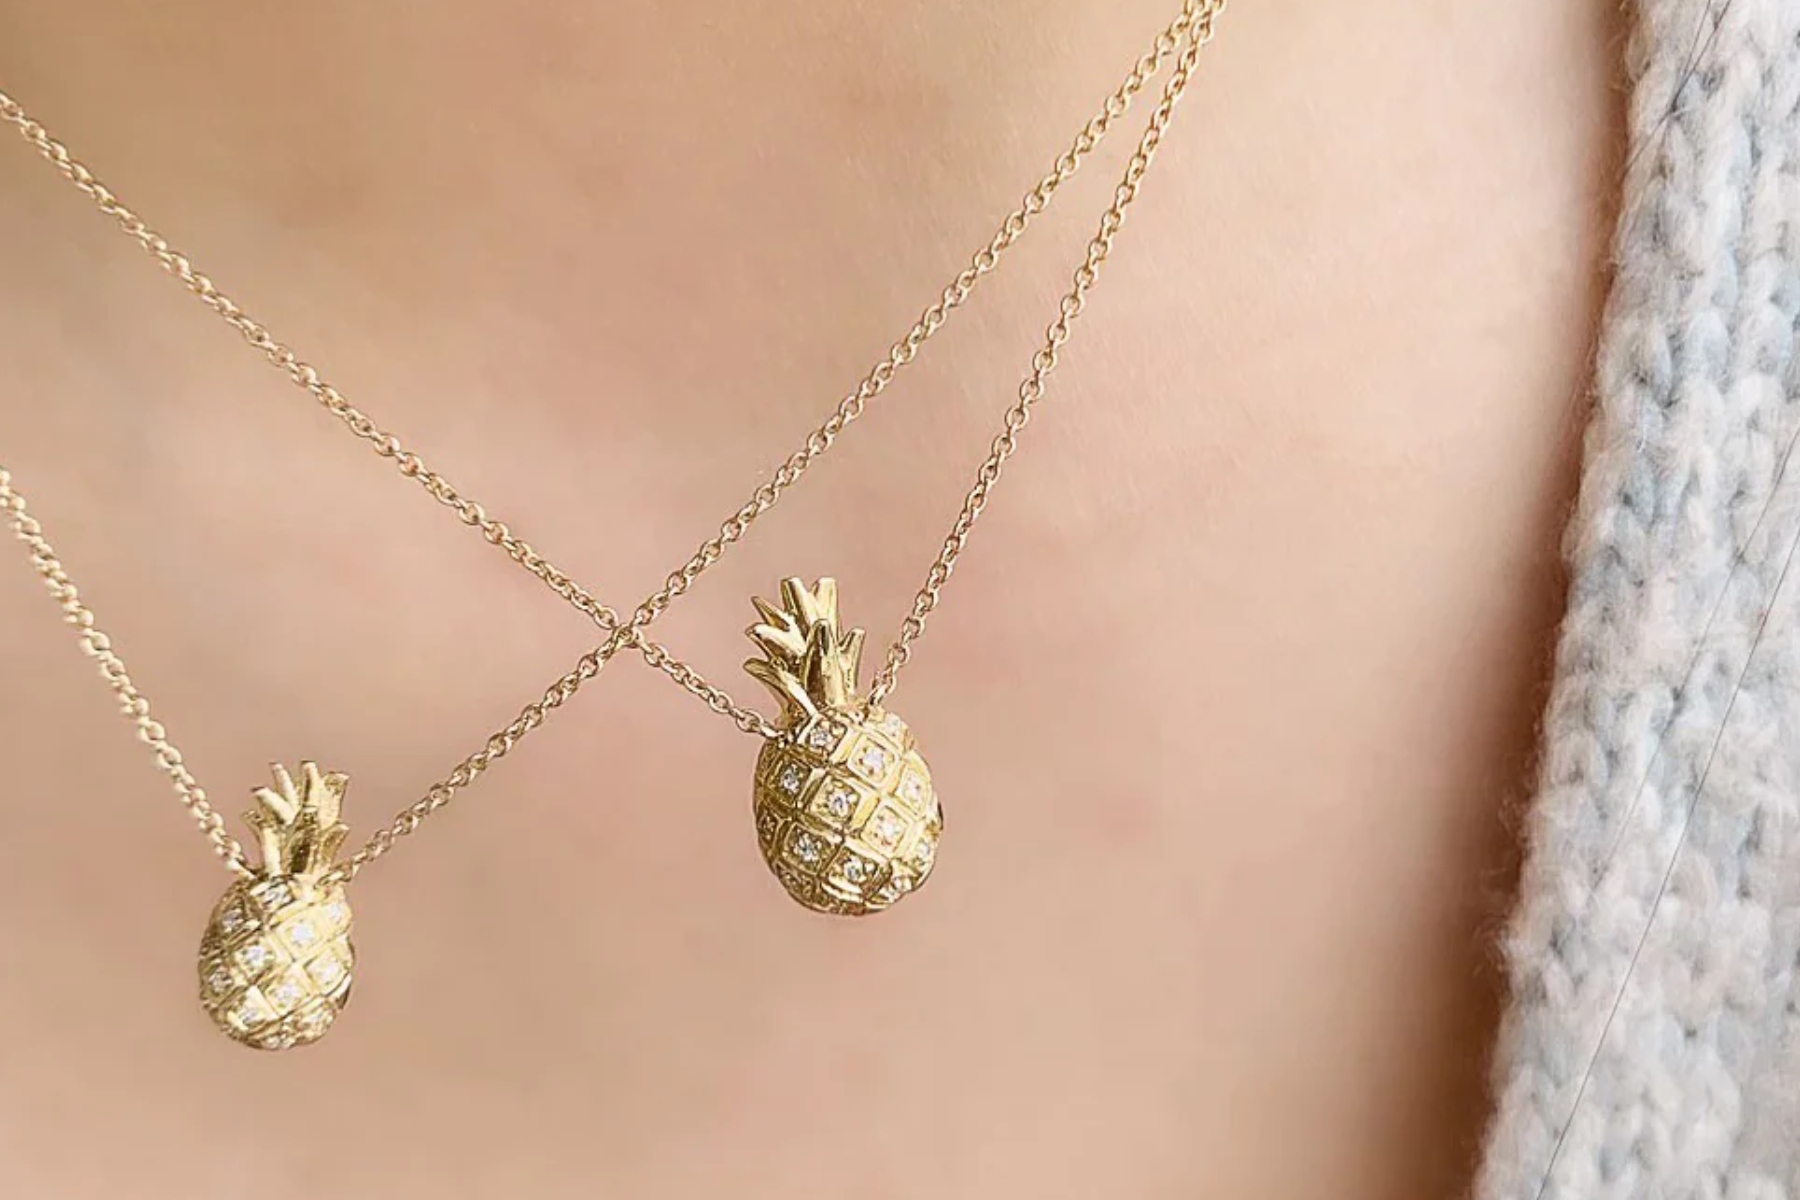 Two gold pineapple necklaces on a woman's neck